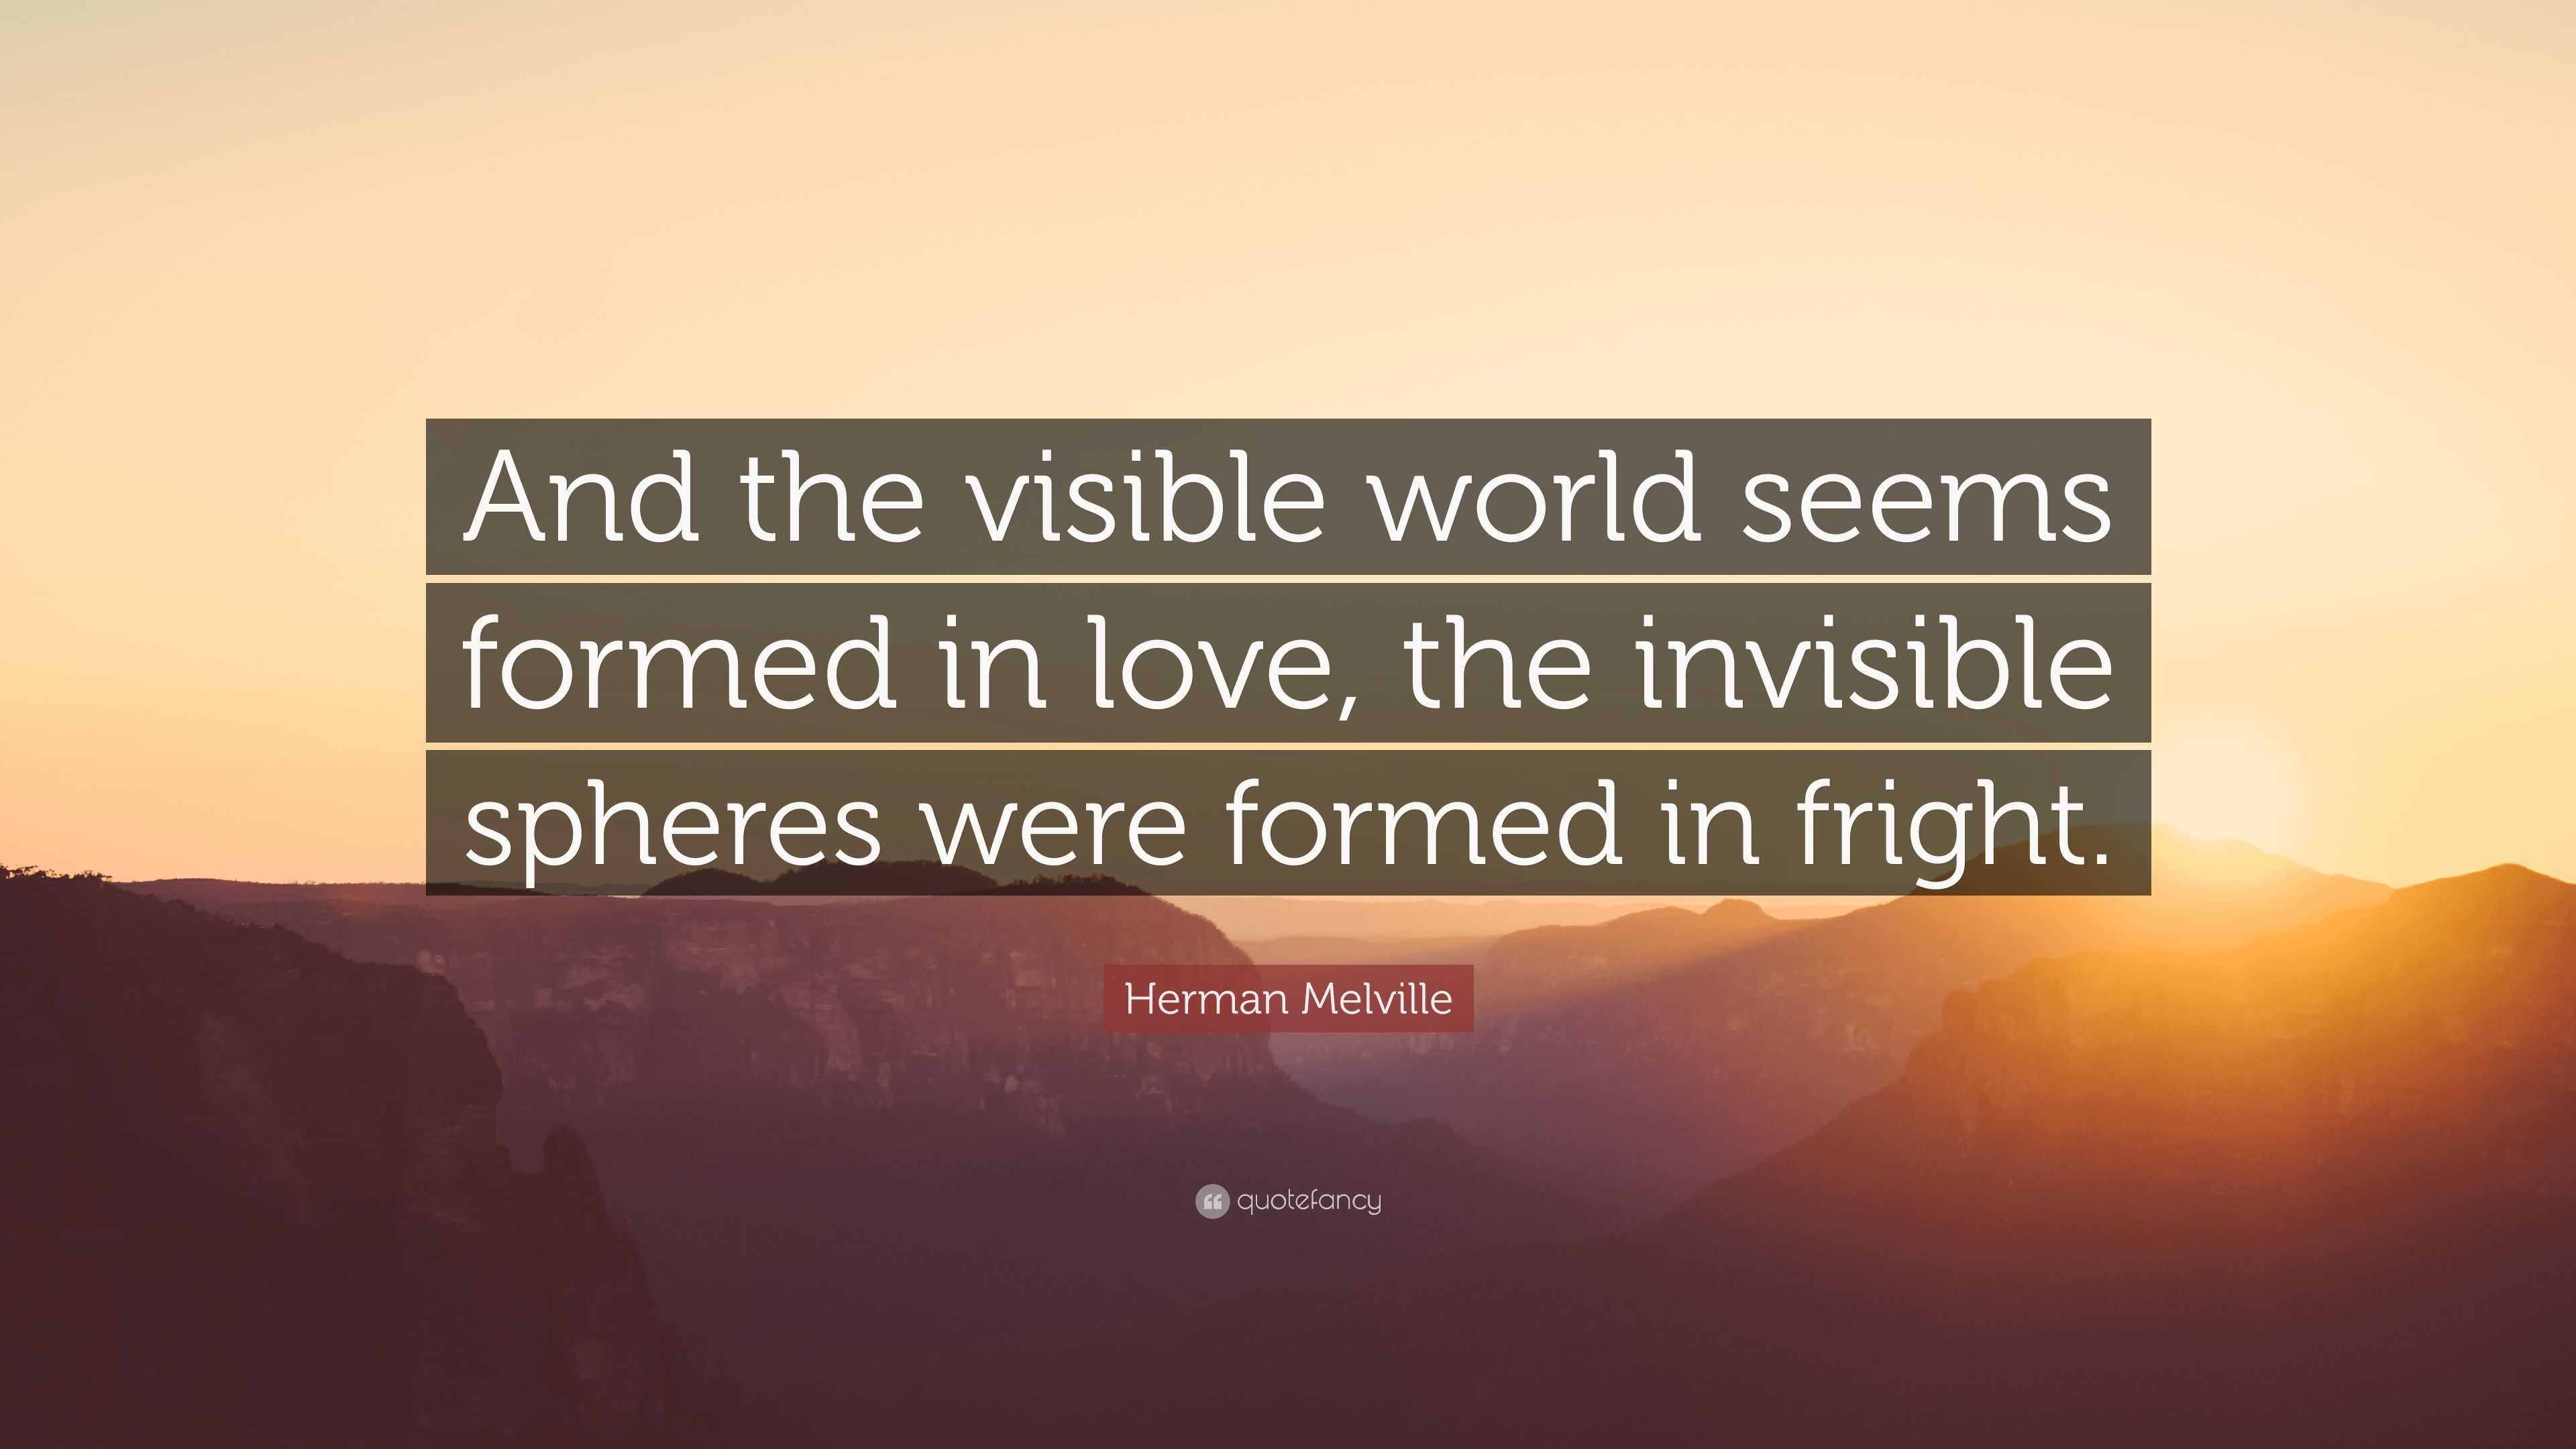 Herman Melville Quote: “And the visible world seems formed in love, the ...